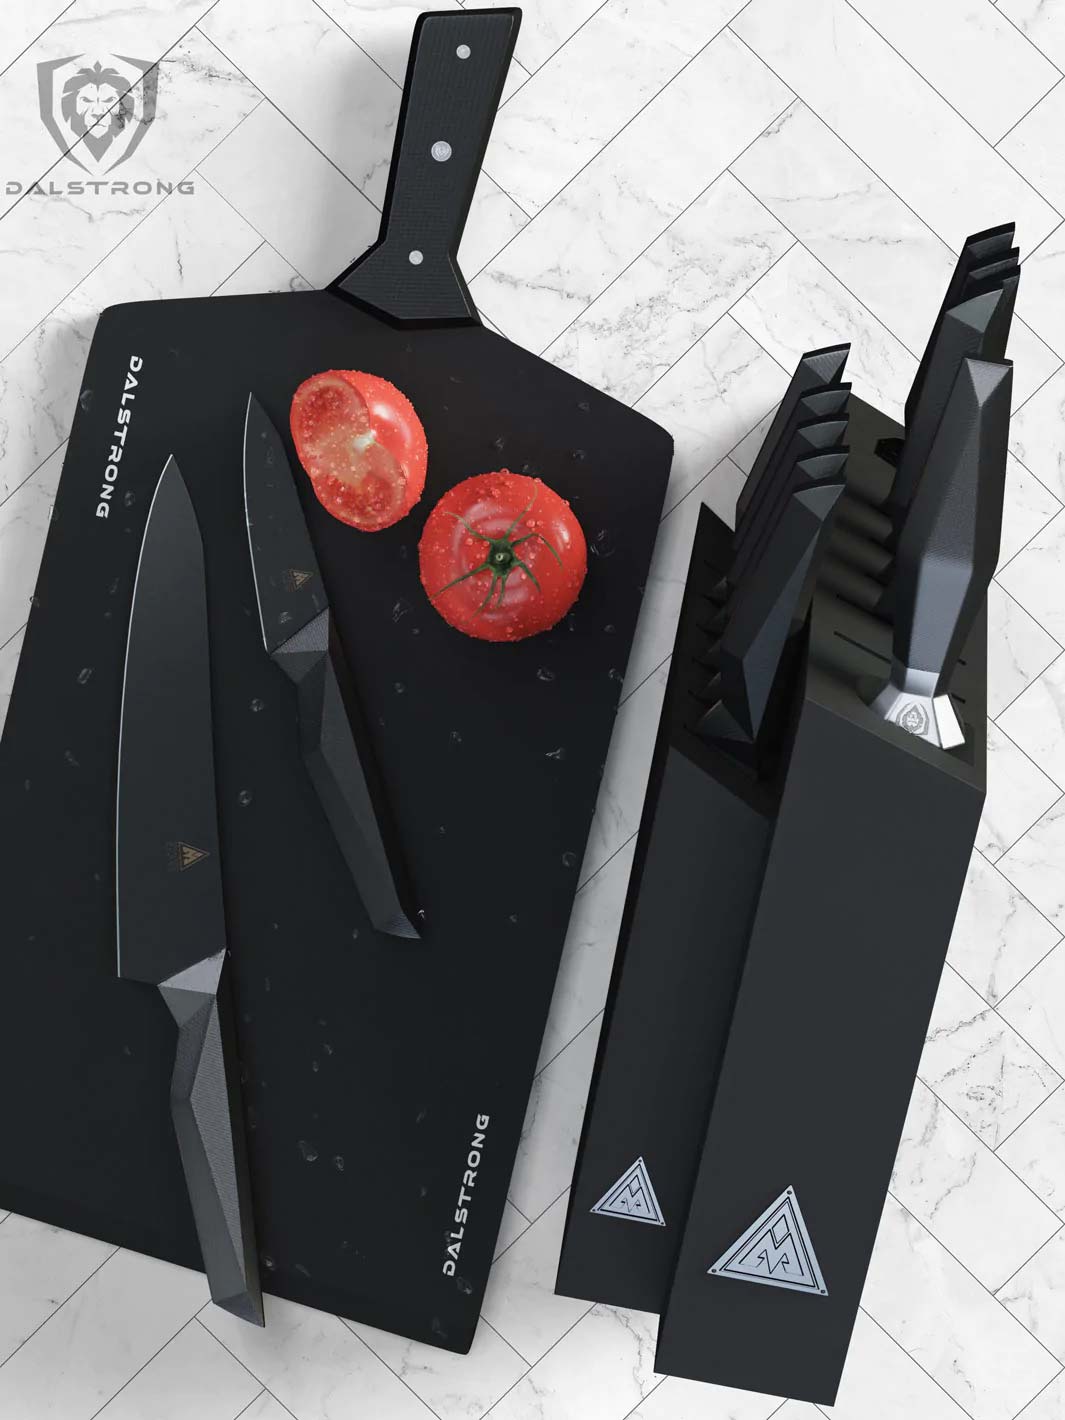 Dalstrong shadow black series 12 piece knife block set beside a dalstrong cutting board.